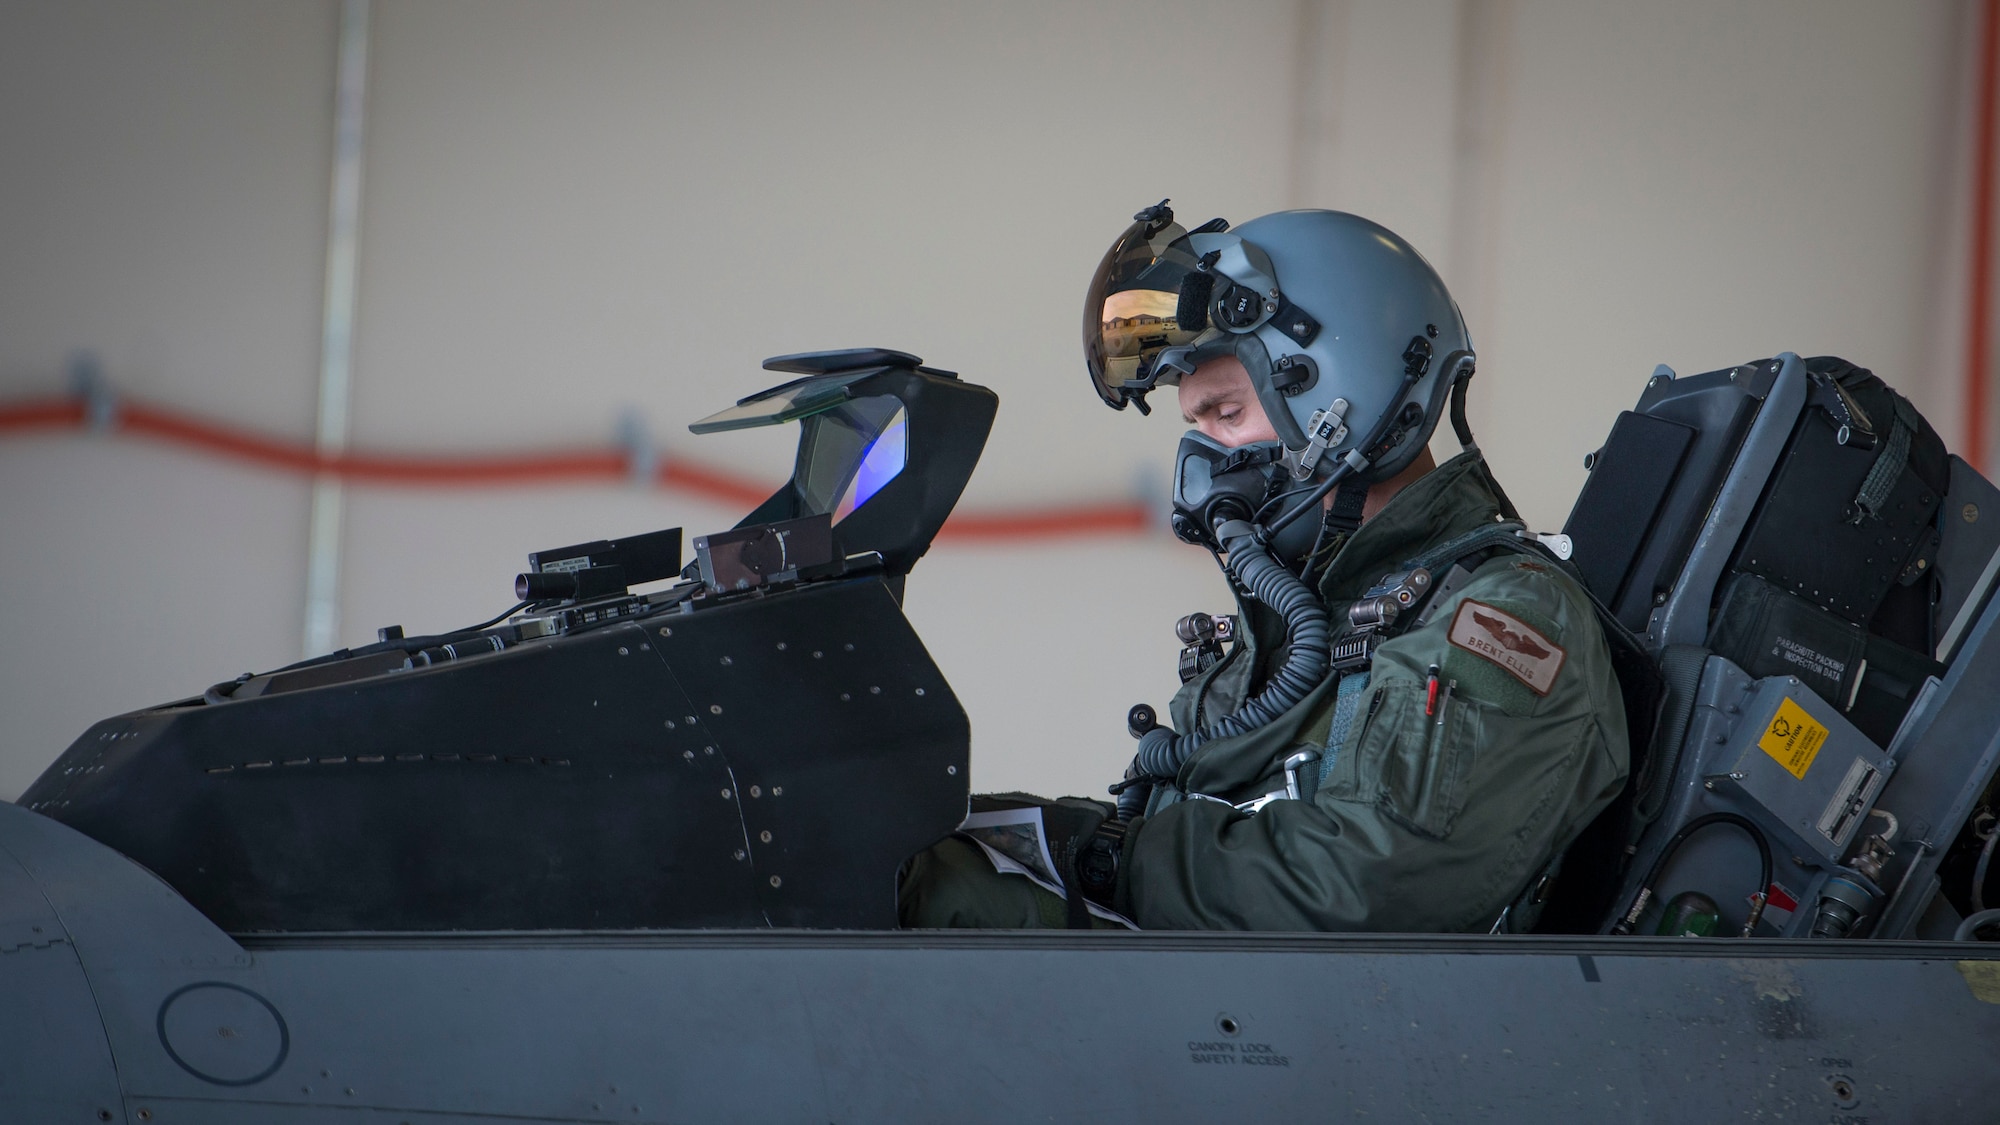 Maj. Brent Ellis, a fighter pilot with the 311th Fighter Squadron, performs pre-flight checks prior to a flight at Holloman Air Force Base, N.M., on Jan. 9, 2017. Ellis flew Brig. Gen. Eric Sanchez, the Commanding General at White Sands Missile Range, on a familiarization flight in an F-16 Fighting Falcon, to demonstrate Holloman’s F-16 mission, and the aircraft’s capabilities. (U.S. Air Force photo by Airman 1st Class Alexis P. Docherty)